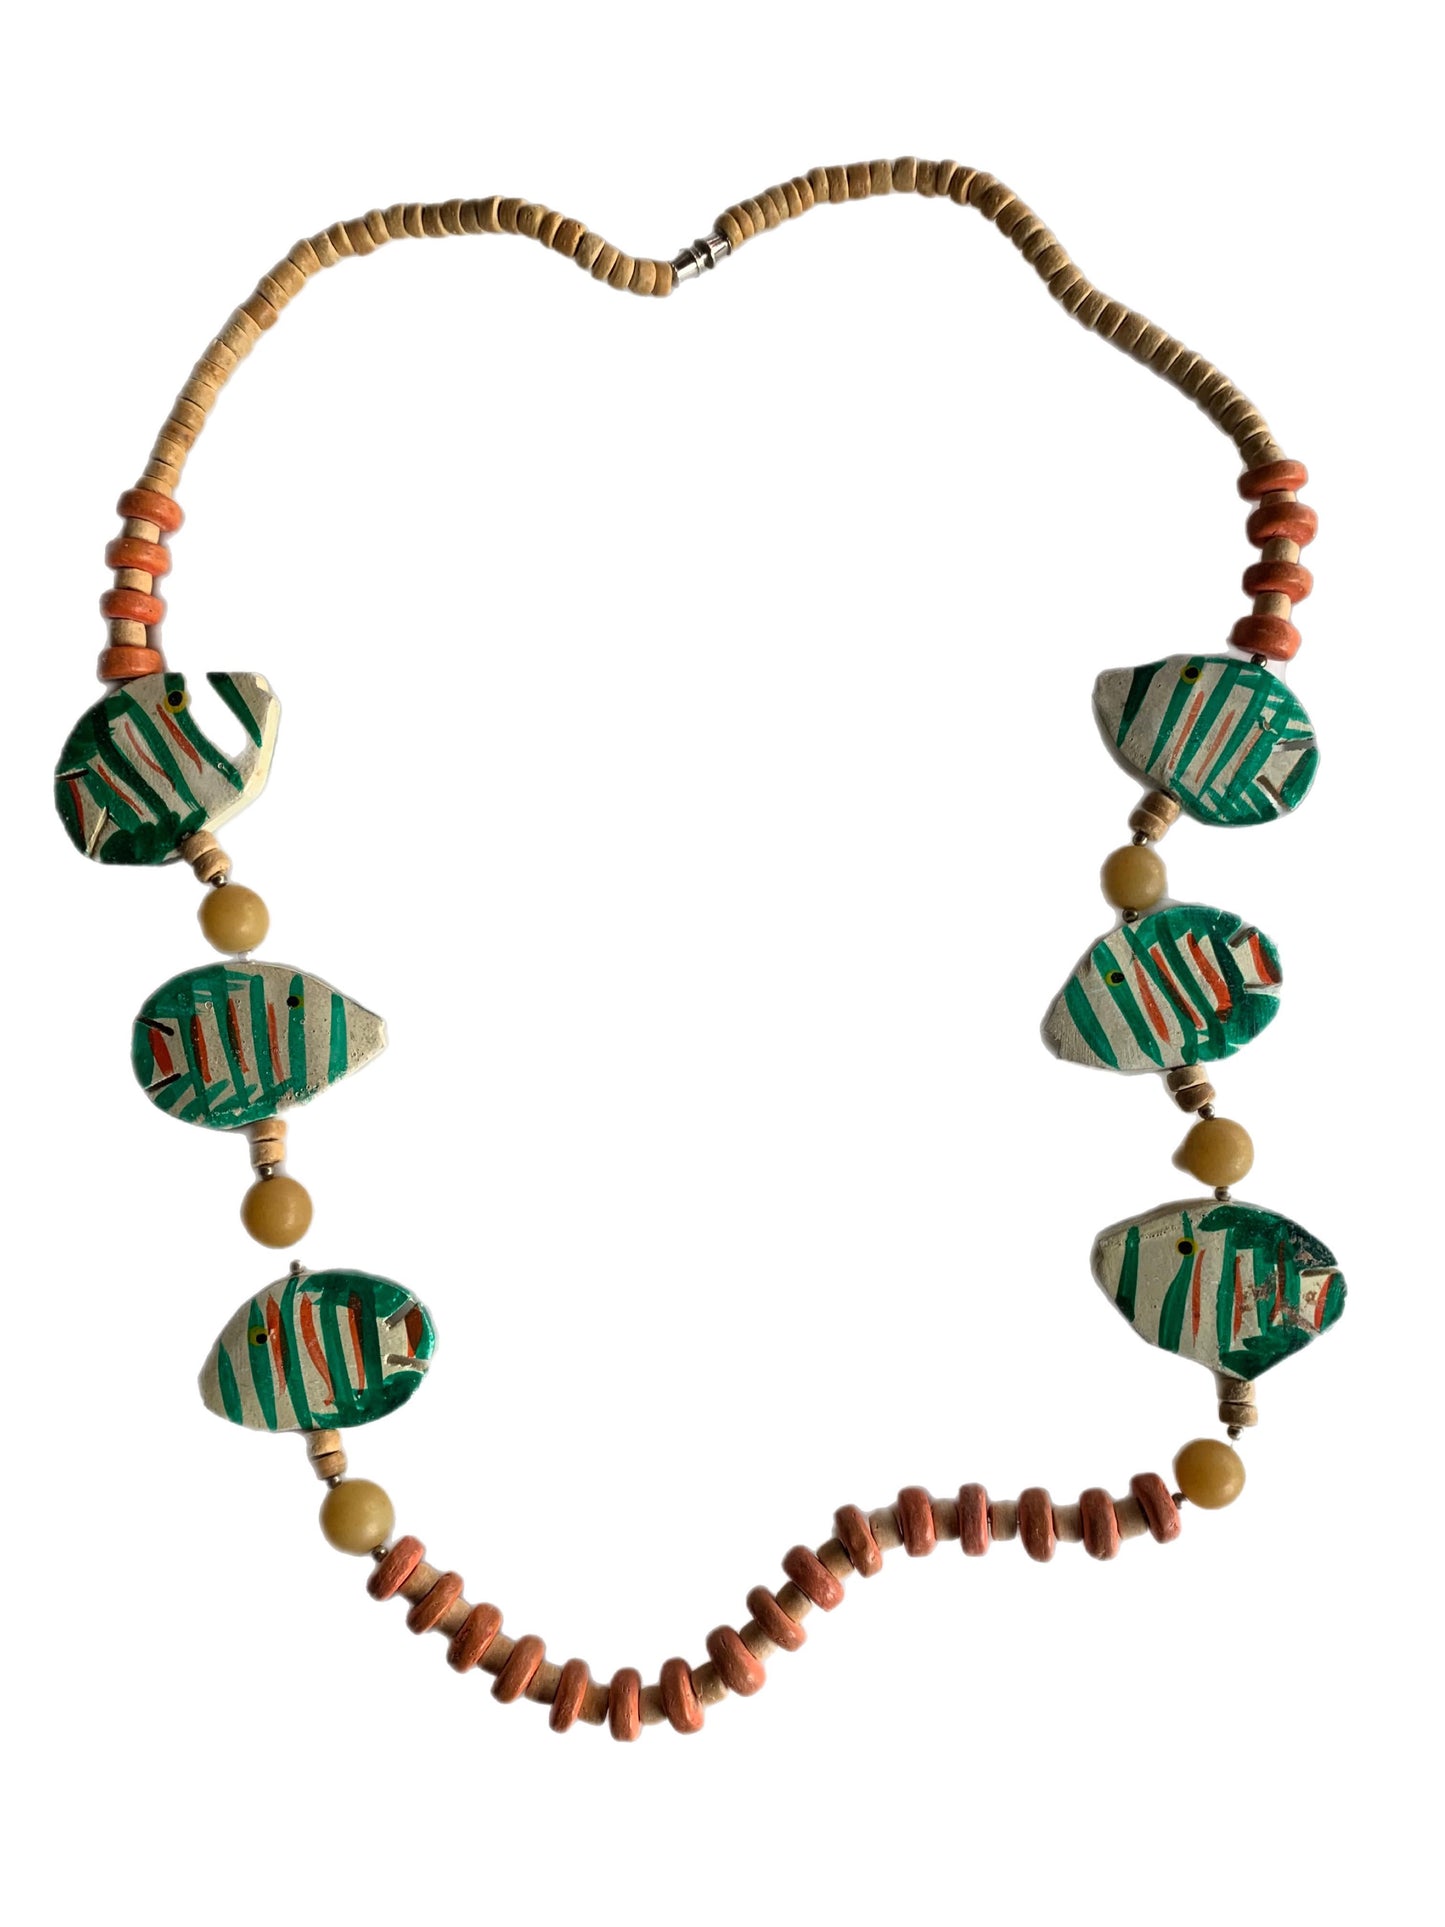 Wooden Tropical Fish Beaded Necklace circa 1980s